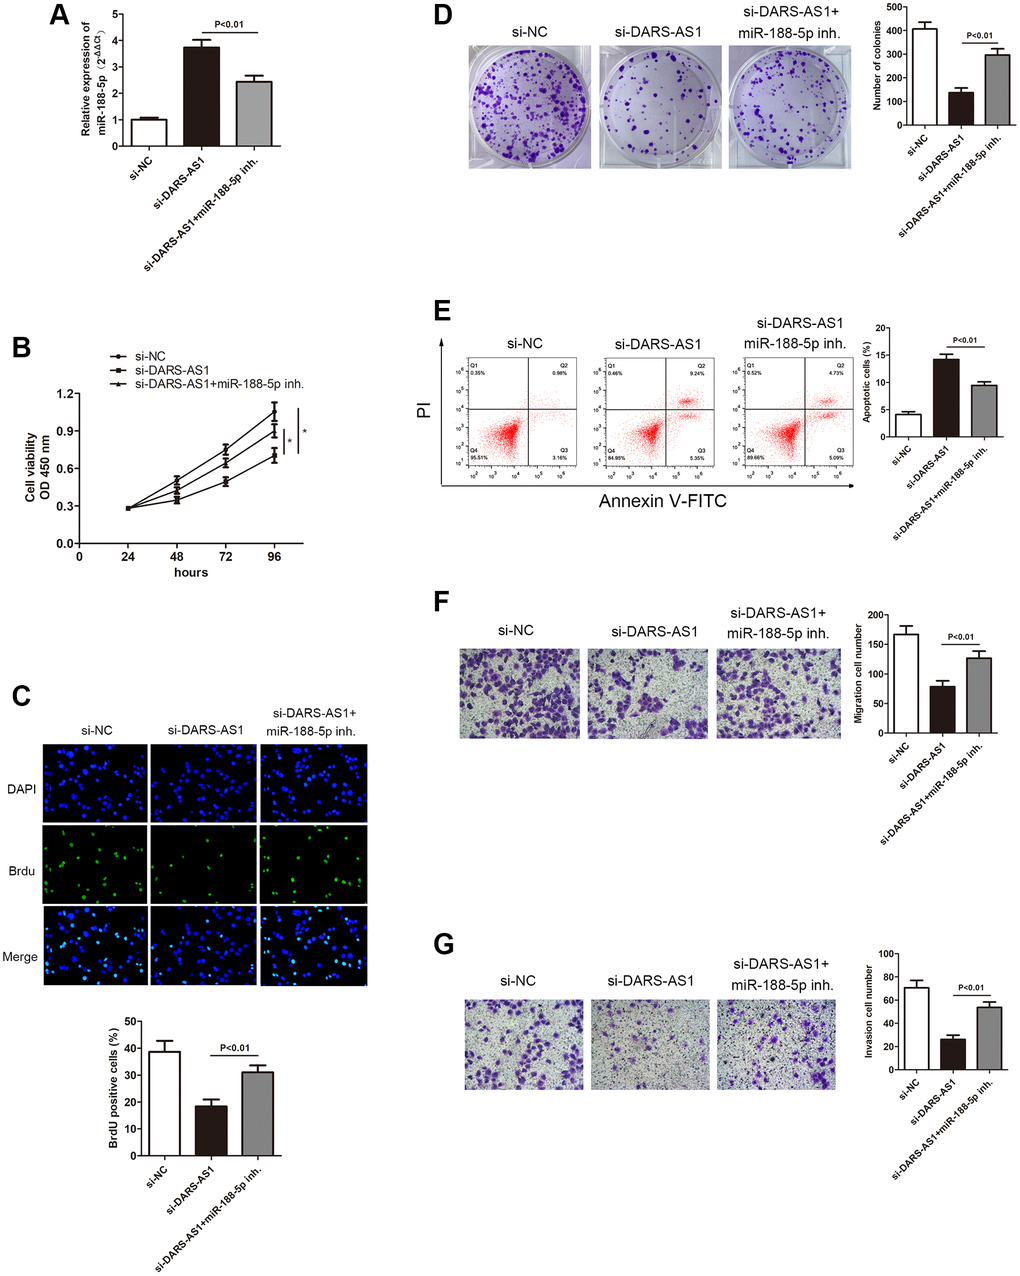 Inhibition of miR-188-5p altered the suppression of A549 cell progression mediated by si-DARS-AS1. (A) Three groups were transfected with si-DARS-AS1, si-DARS-AS1+miR-188-5p inhibitor, and si-NC in the A549 cell line. The cell proliferative capacity of the three groups was measured using the (B) CCK-8, (C) BrdU, and (D) colony formation assays (*p E) Inhibition of miR-188-5p resulted in a significant reduction in the apoptosis ratio (upper right quadrant+lower right quadrant). The transwell chamber results showed that inhibition of miR-188-5p significantly facilitated cell migration (F) p G) p 